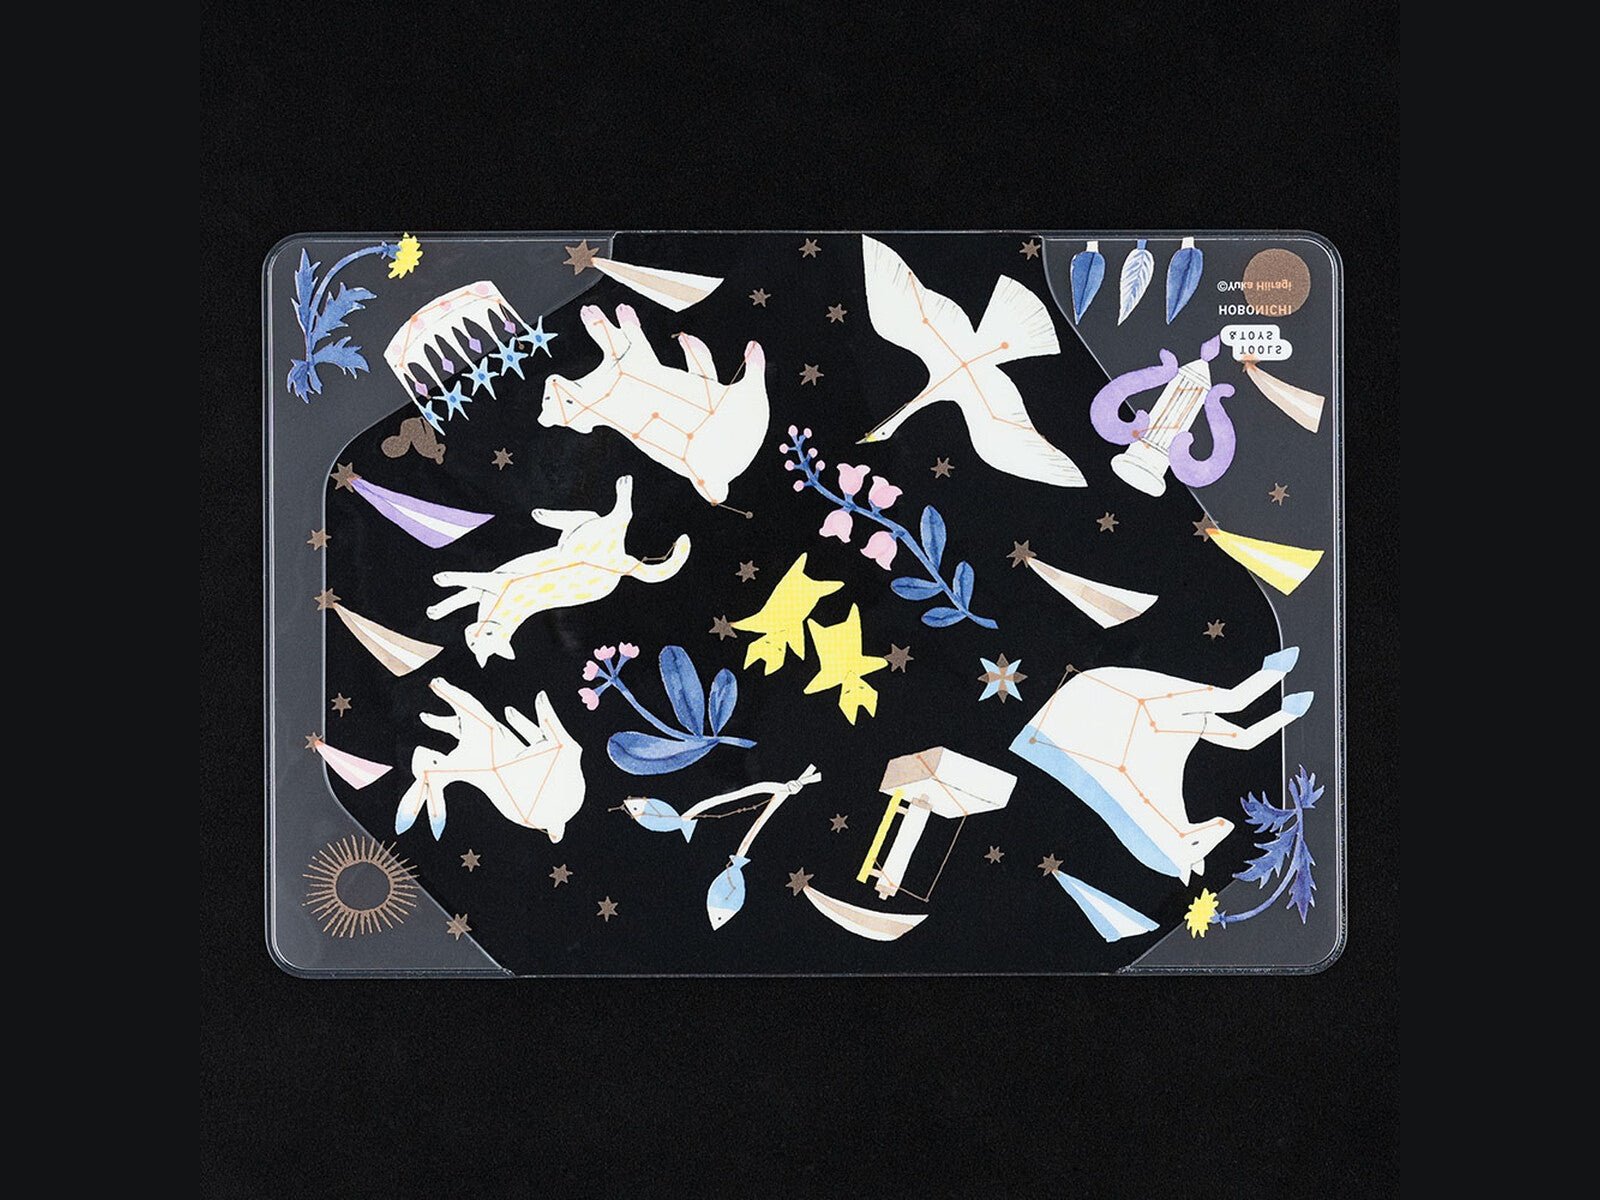 Hobonichi Yuka Hiiragi: Cover on Cover for A6 Size Light in the Distance